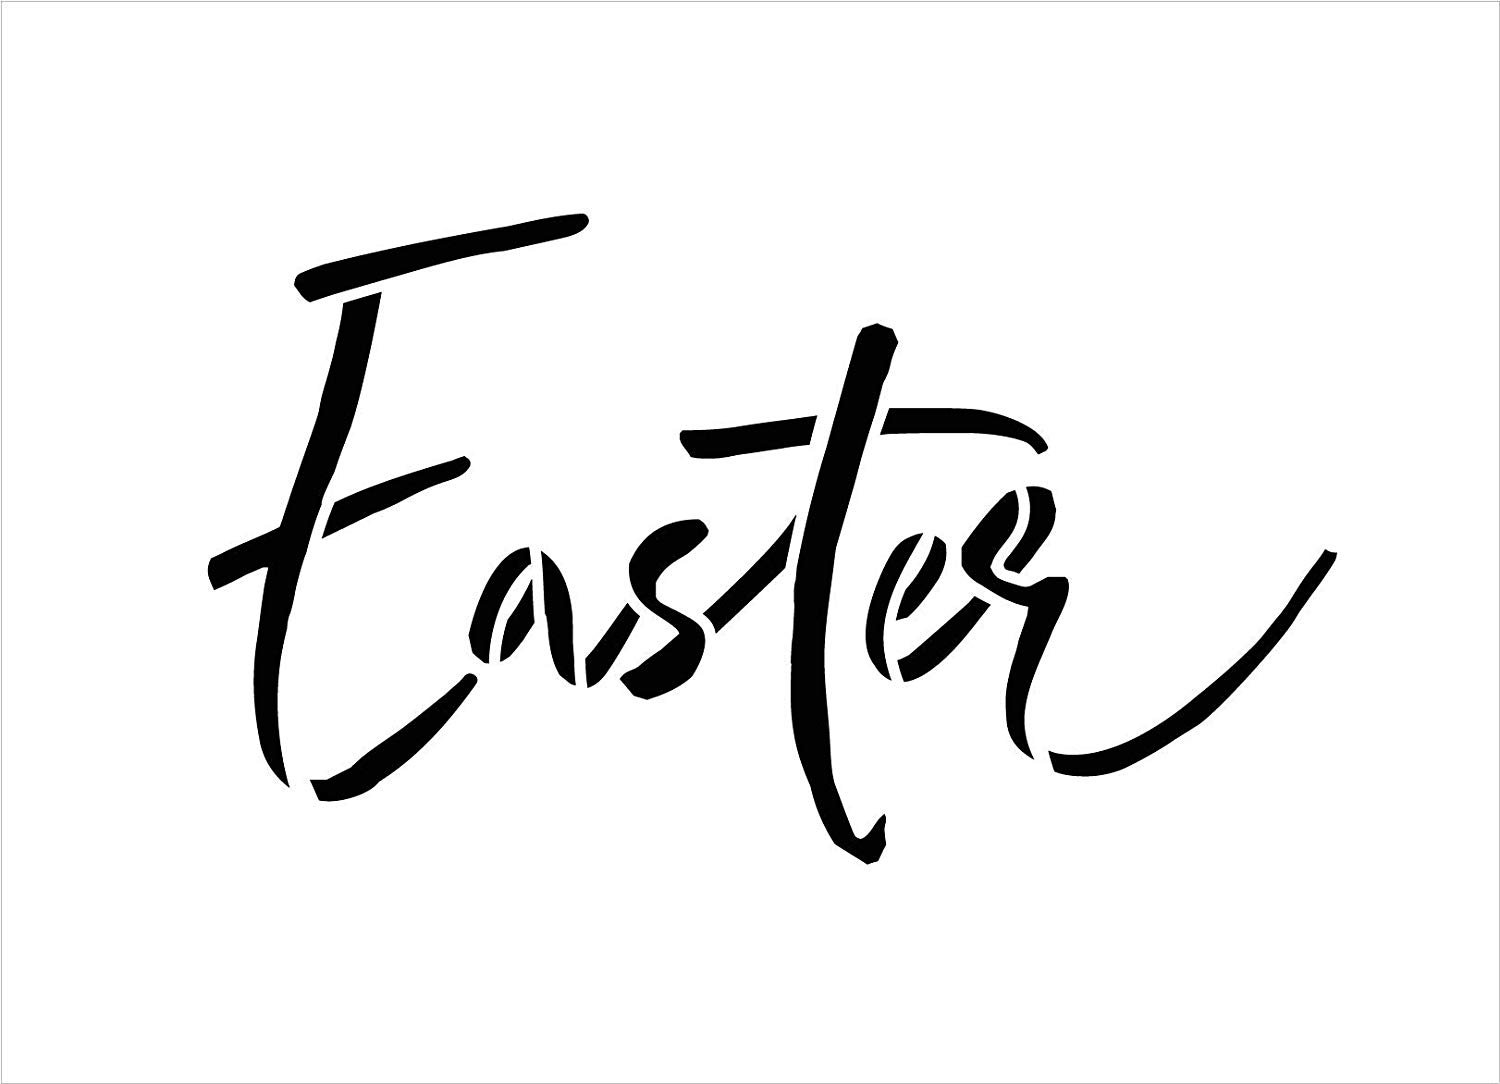 Easter Script Stencil by StudioR12  DIY Christian Spring Home Decor  Rustic Handwritten Word Art  Craft & Paint Farmhouse Wood Signs  Reusable Mylar Template  Select Size 13.5 x 9.75 inch - image 3 of 4